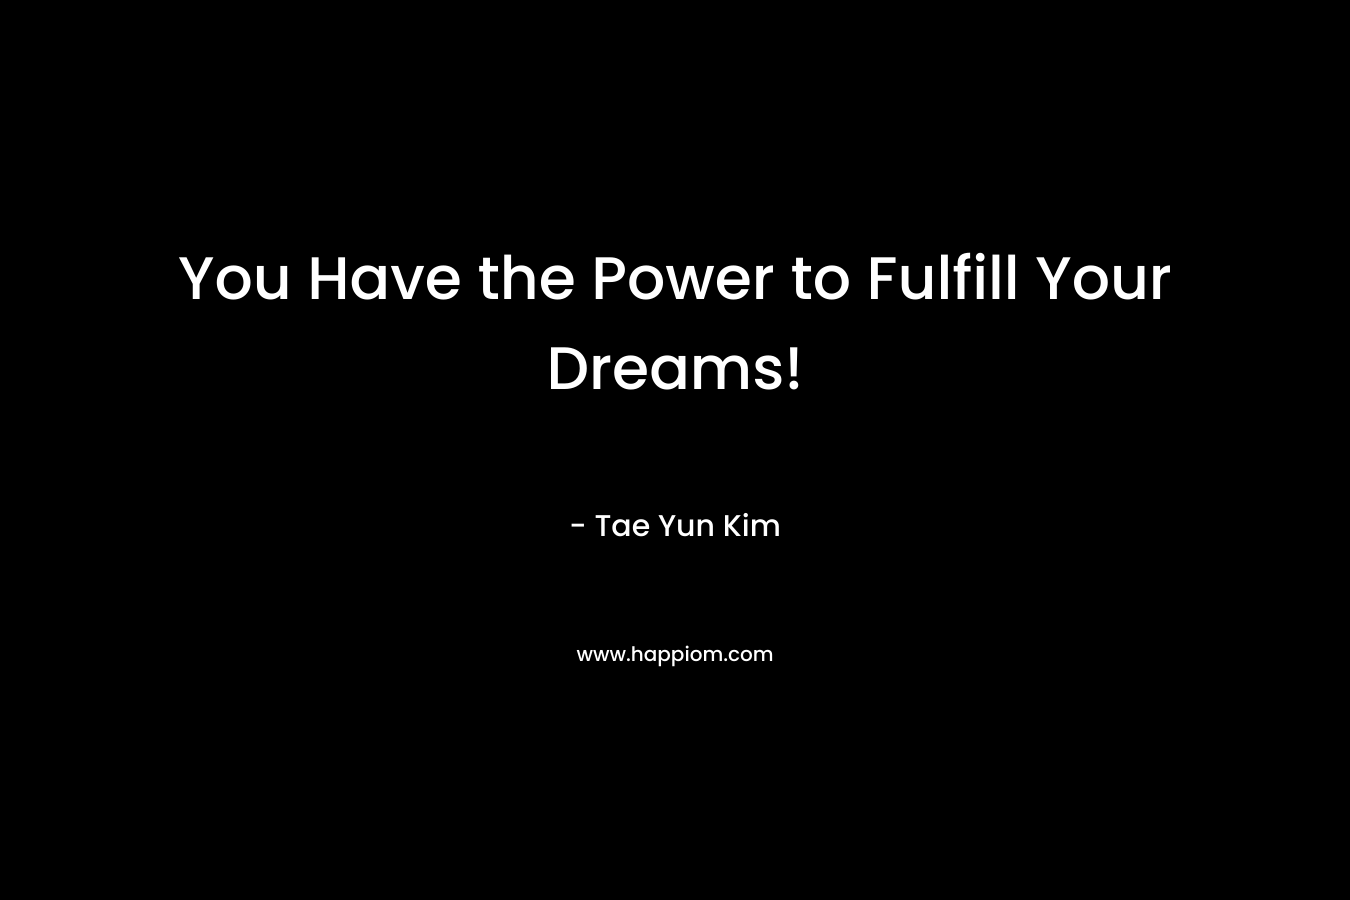 You Have the Power to Fulfill Your Dreams!